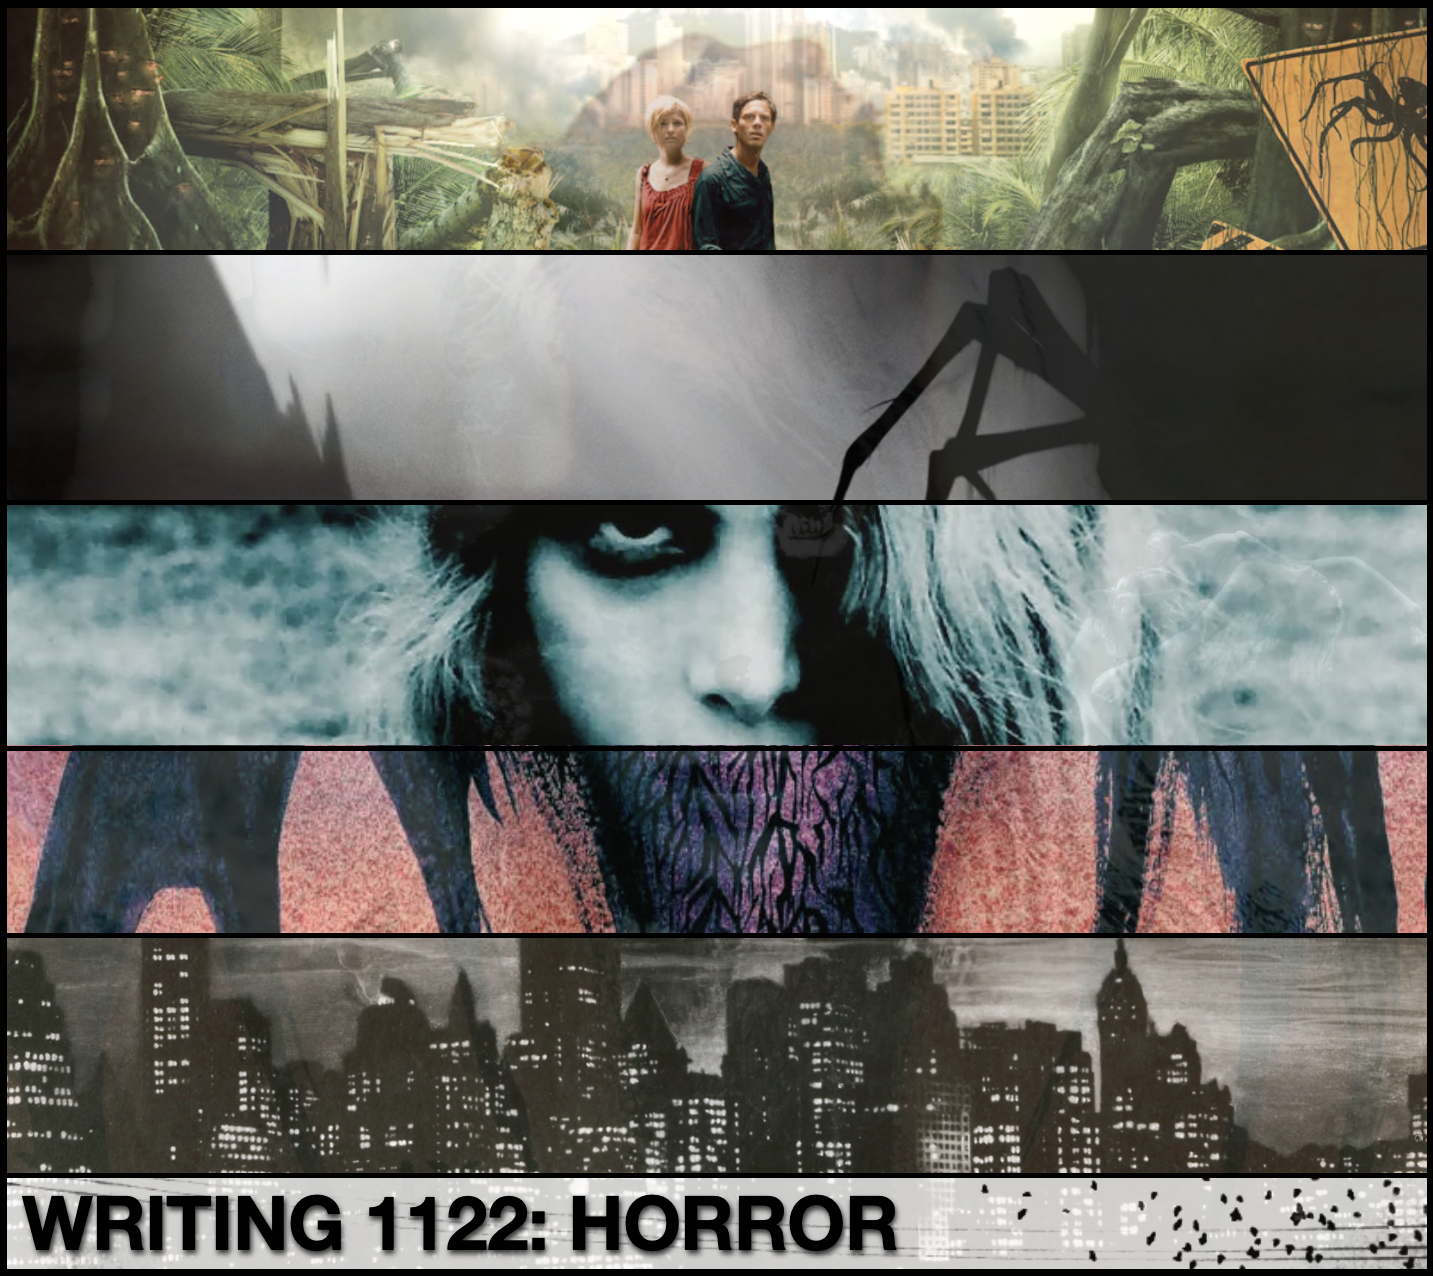 An amalgam of horror images, overlapping in a way that obscures them, with the words Writing 1122: Horror just below.